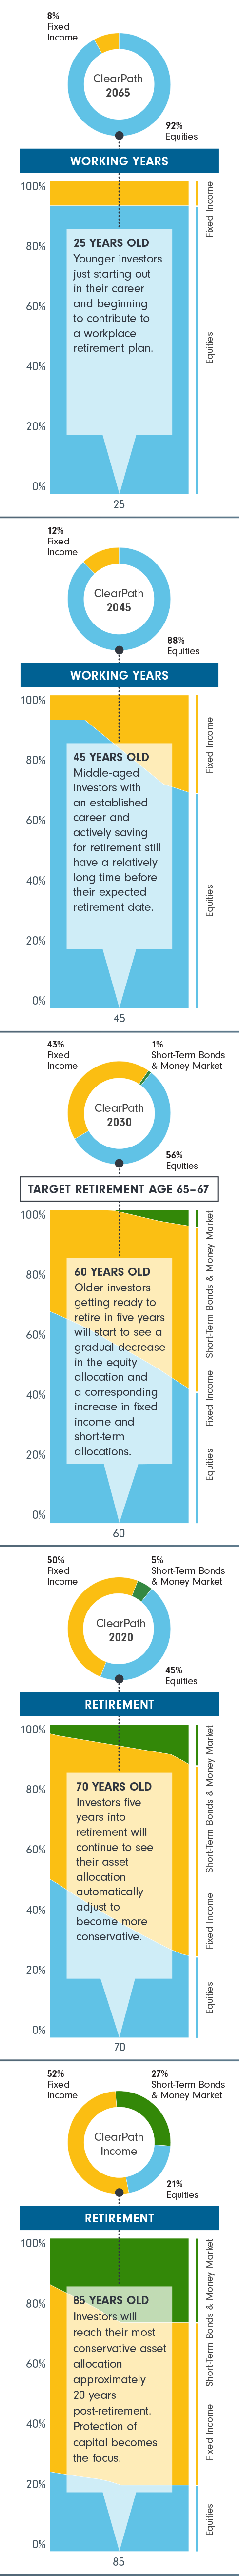 Asset class composition of the ClearPath portfolio’s glidepath changes based on an investor’s age and appropriate risk management, and how the percentage invested in fixed income, equities and Short-Term Bonds/Money Market changes over time. A young investor in their 20’s  would have 92% invested in equities and 8% in fixed income whereas someone in retirement in their 80’s would have ClearPath income with strategic asset allocation into three broad buckets of 21% in Equities, 52% in Fixed Income and 27% in Short-Term Bonds/Money Market.
The target asset mix of each ClearPath Portfolio based on members' working and retirement years from the age of 20 to 100. From the ages of 20 to just over 40, the percentage of fixed income (8%) and equities (92%), remains the same. There is an increase in the percentage allocated to fixed income until the age of 60 when Short-Term Bonds/Money Market is introduced into the portfolio at 1% while allocation in fixed income is 43% and in equities is 56%. This allocation to fixed income and short-term bonds continue to increase past the target retirement age (65-67 years old). At 85, protection of capital becomes the focus and allocation remains the same from that point on with 21% in Equities, 52% in Fixed Income and 27% in Short-Term Bonds/Money Market.
